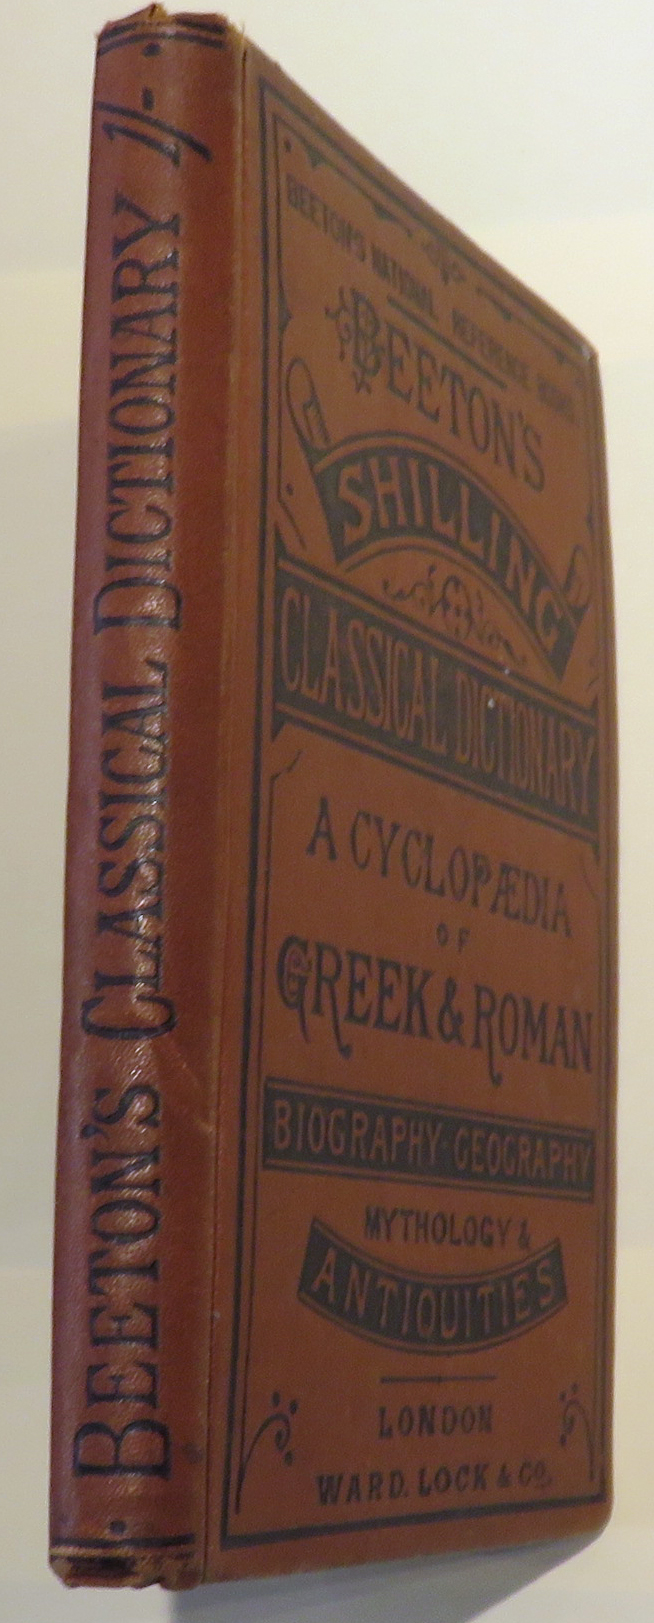 Beeton's Classical Dictionary. A Cyclopedia of Greek And Roman Biography, Geography, Mythology And Antiquities 